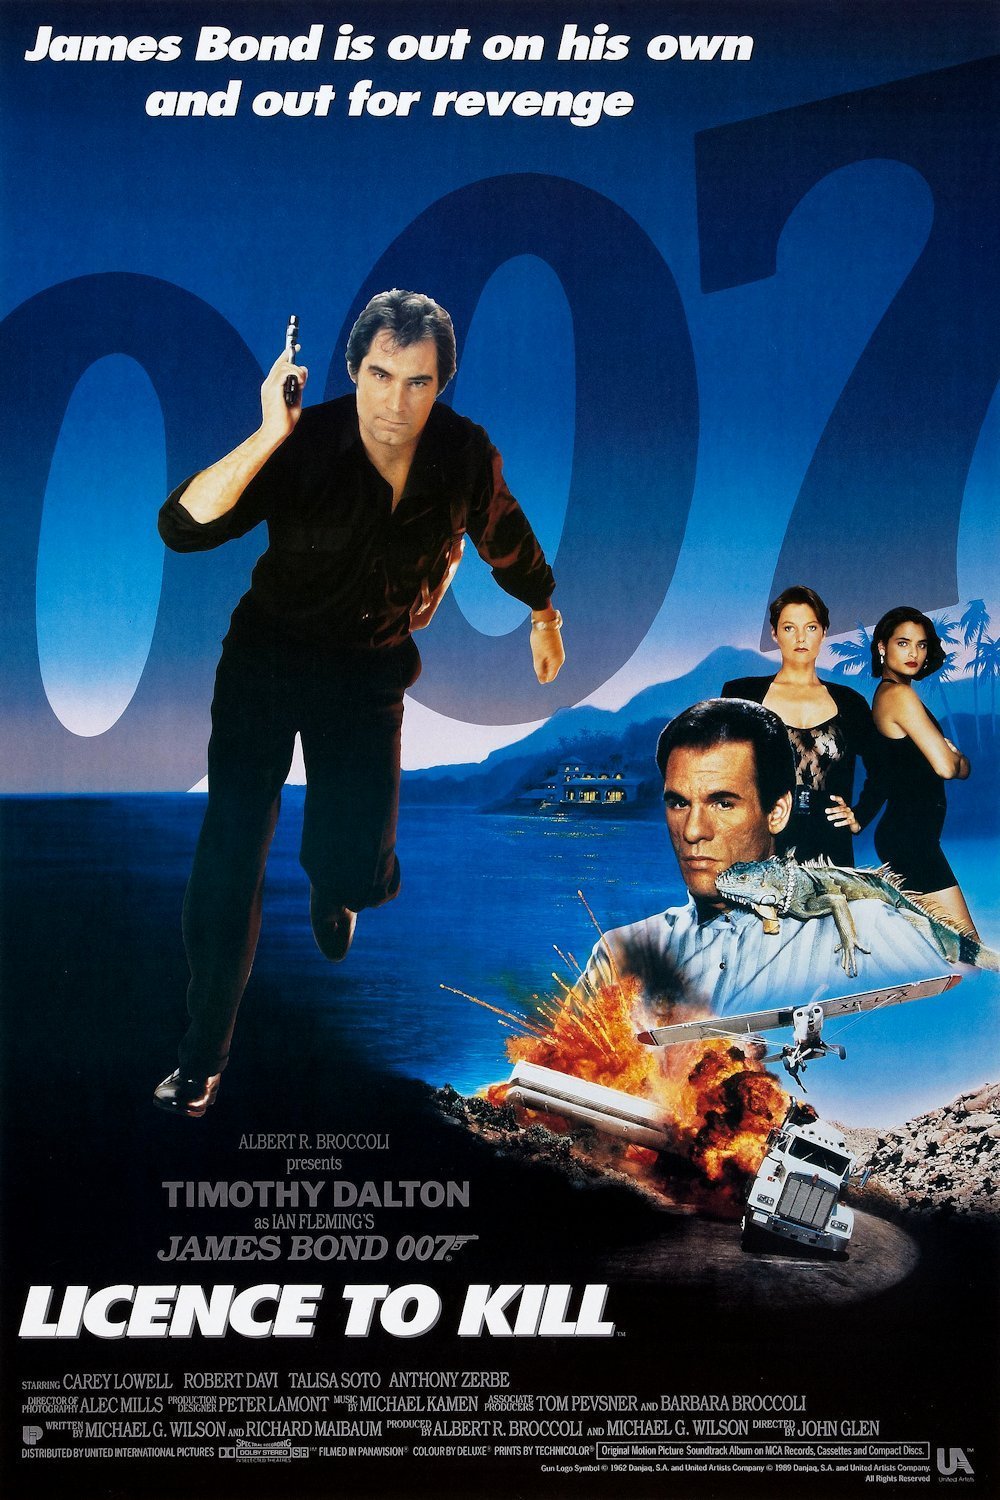 Licence to Kill poster